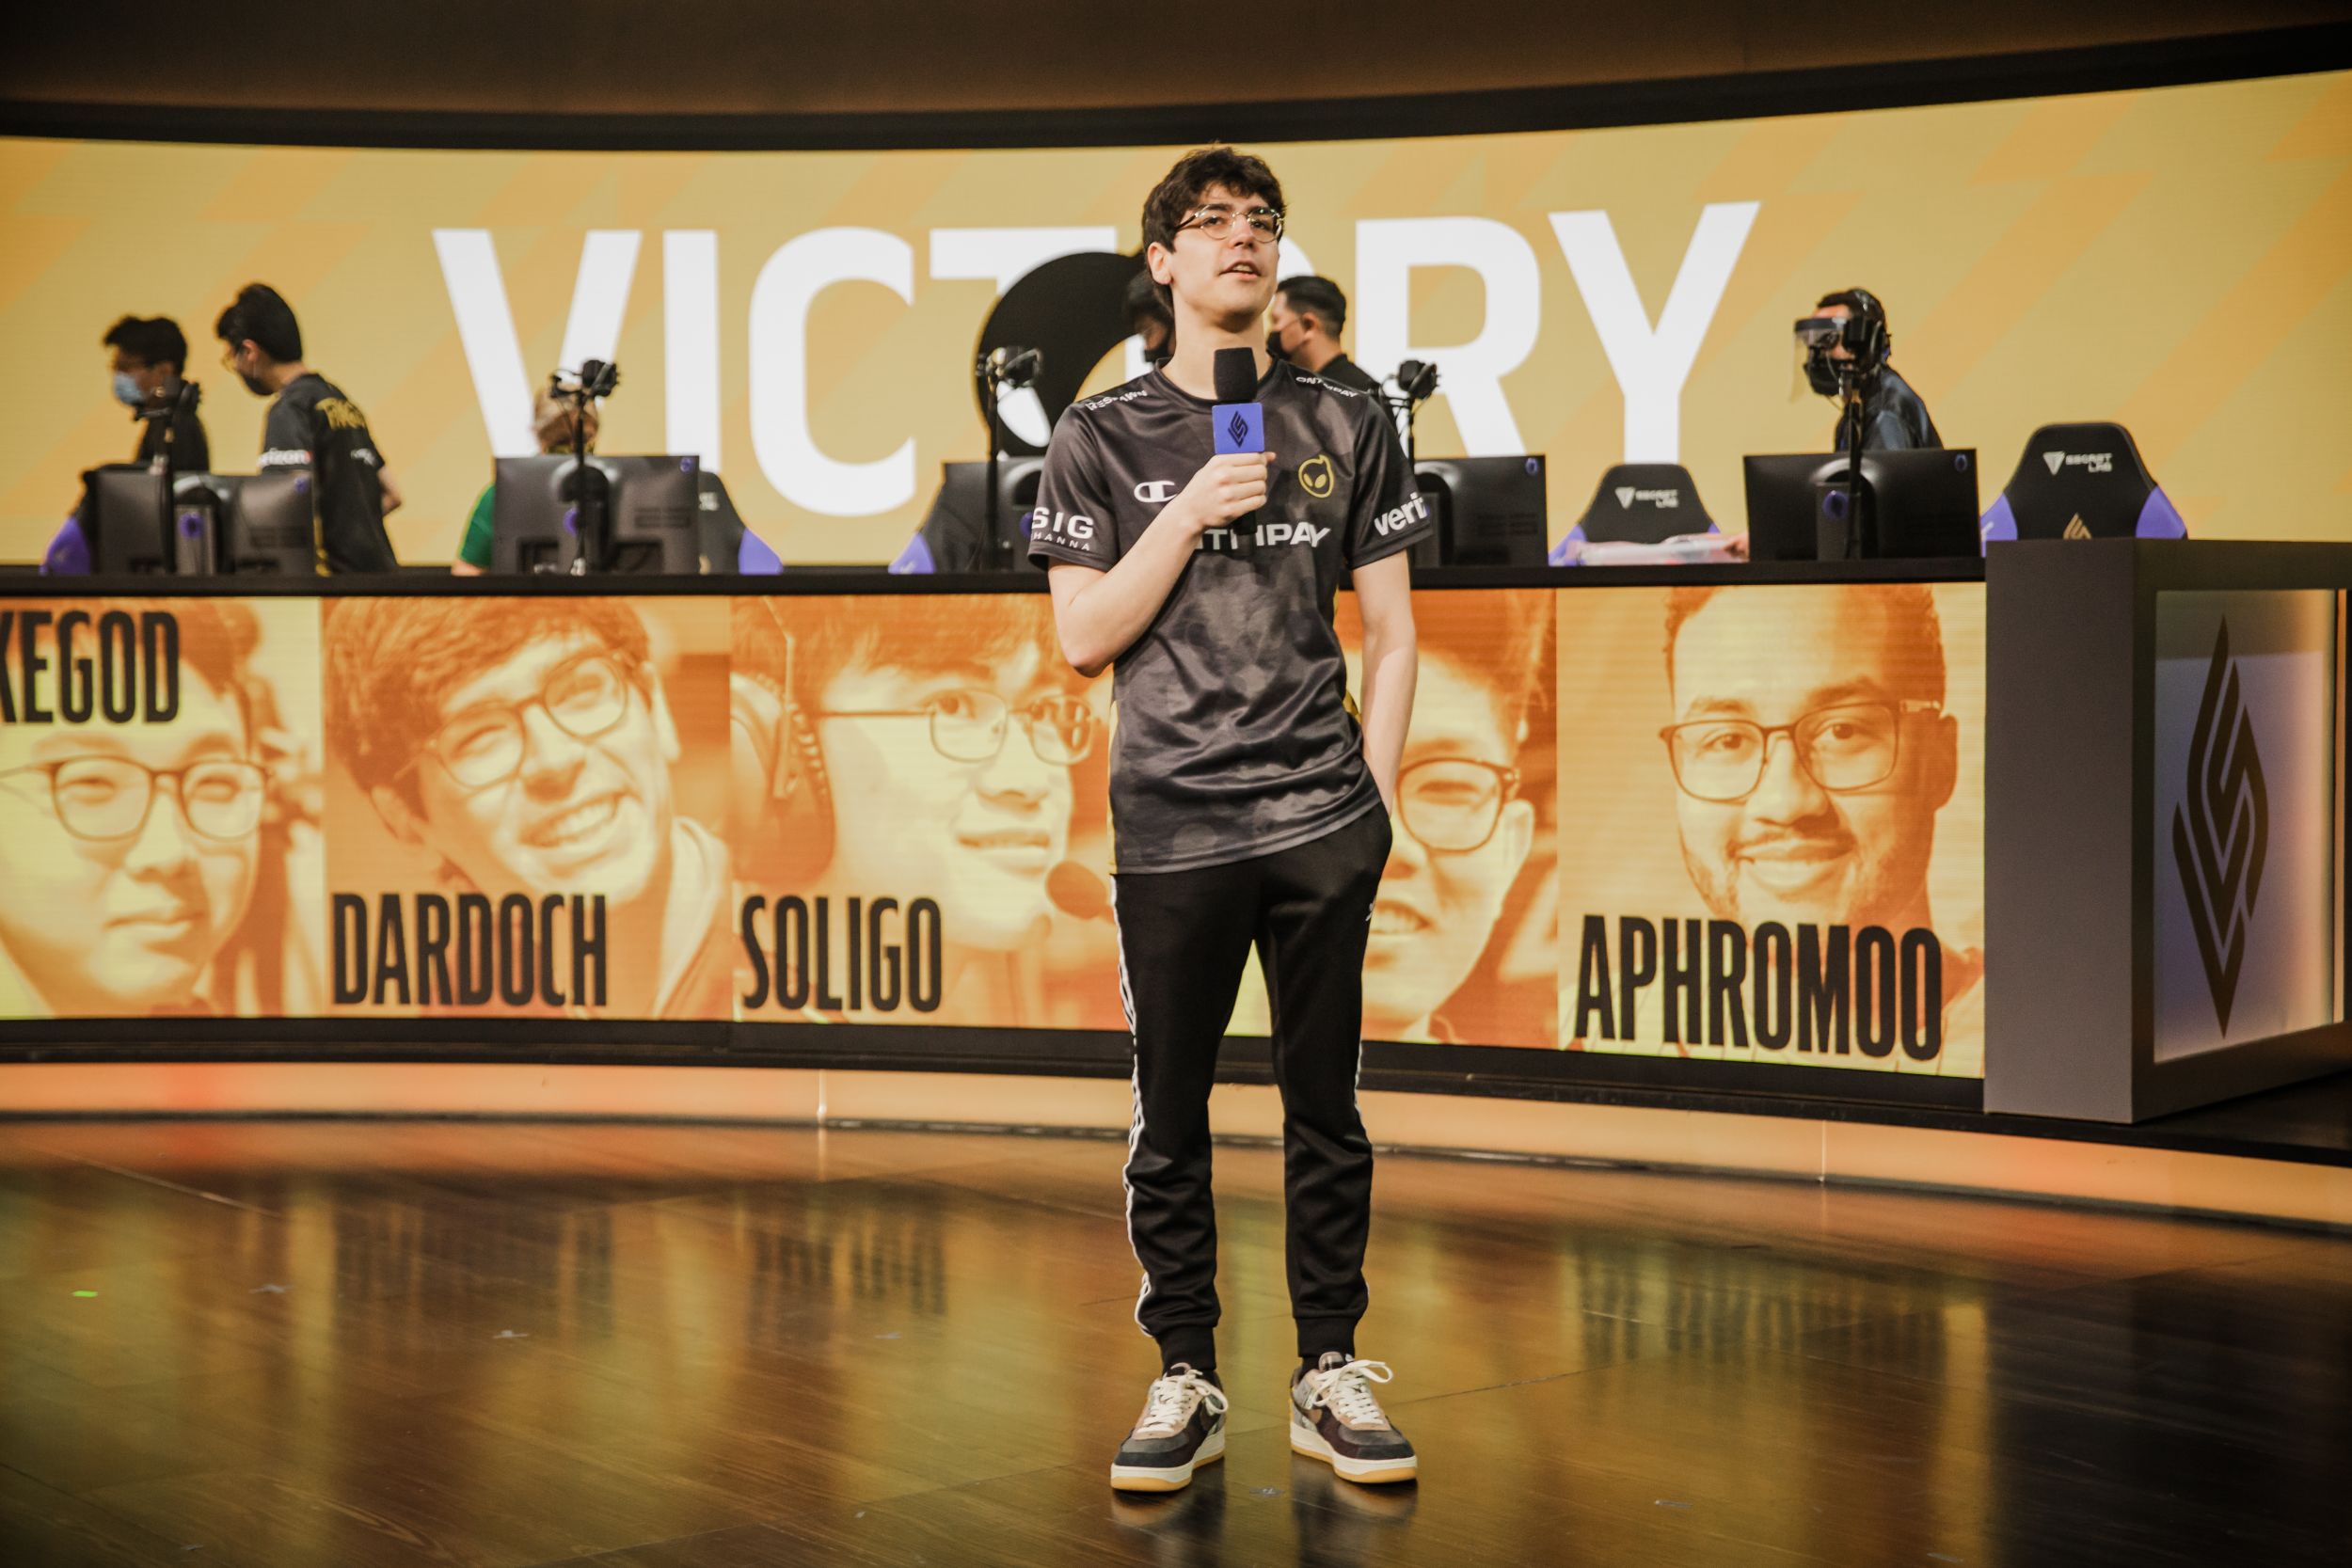 Dardoch in an LCS post game interview on Dignitas